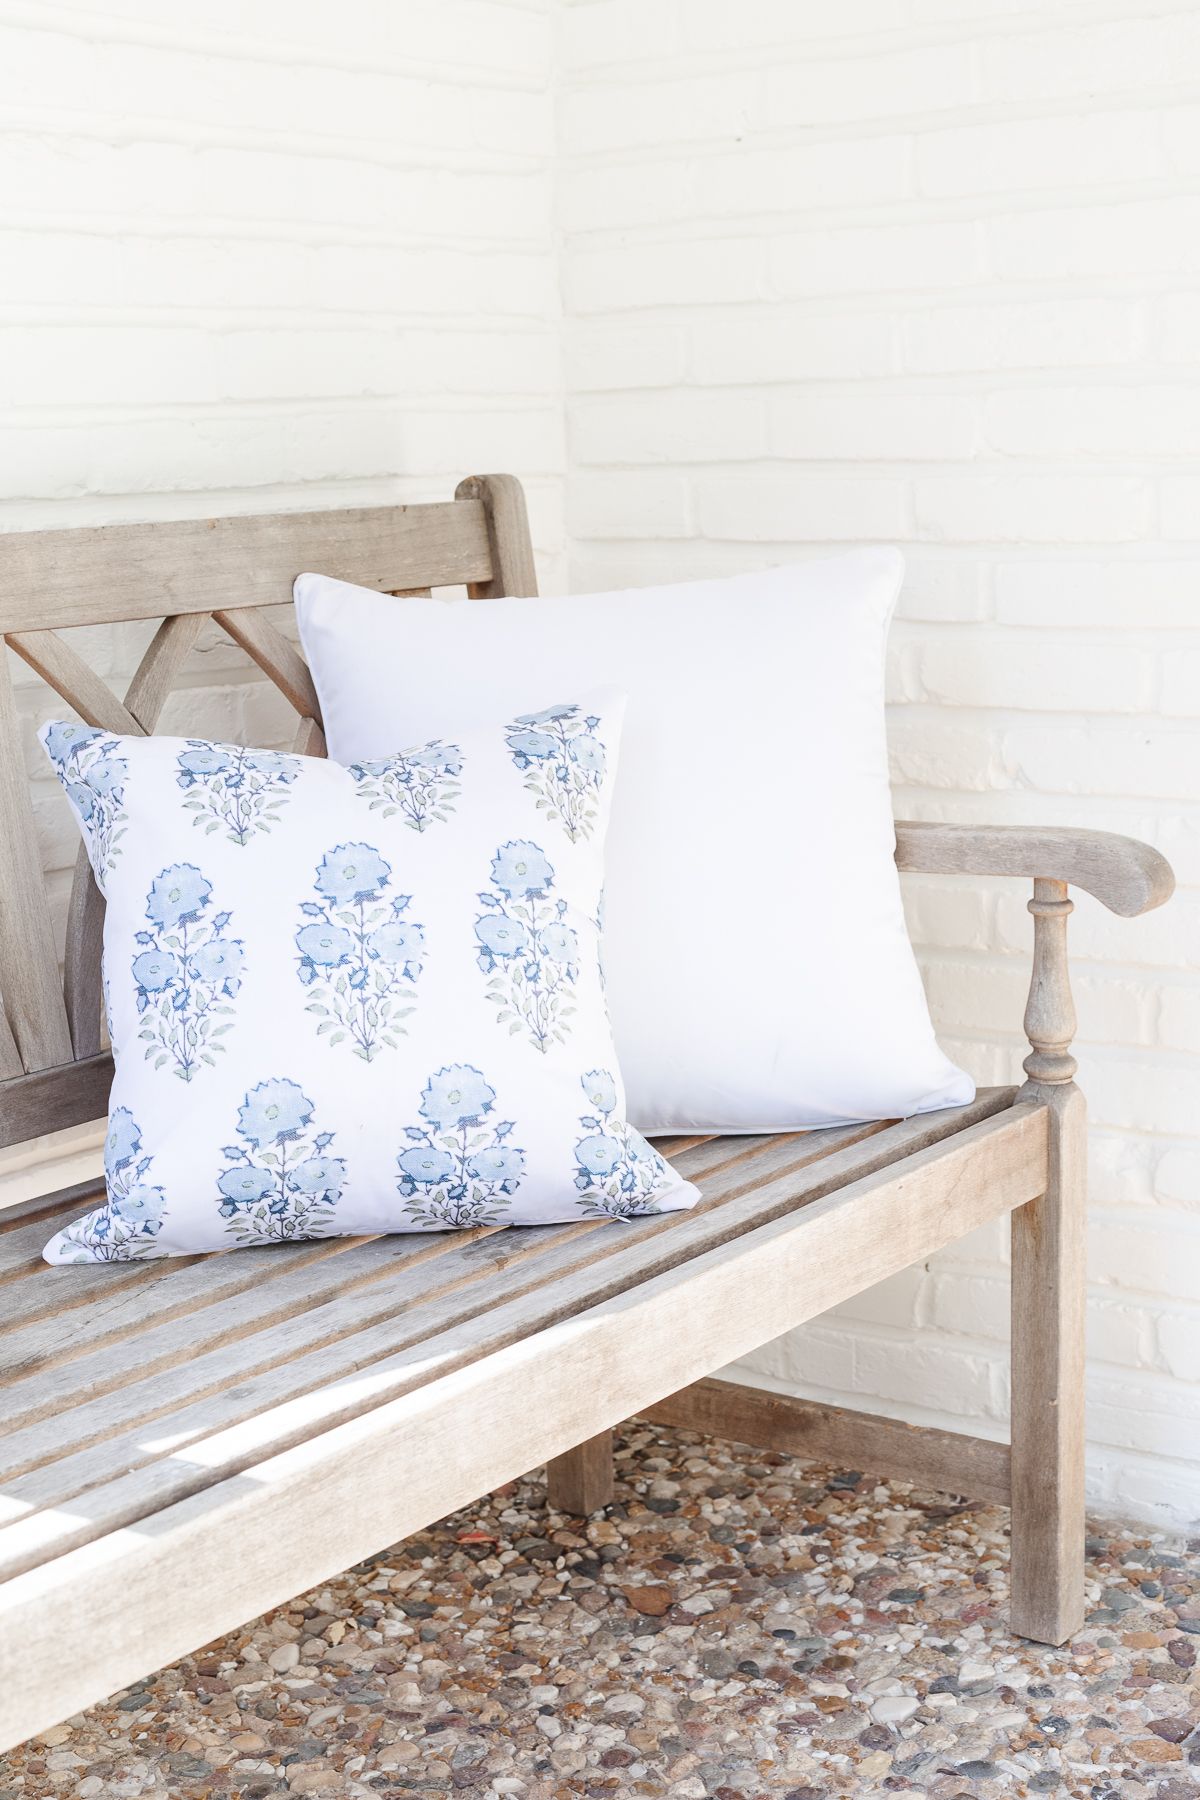 An entryway in a home, with cream walls, and a blue block print Amazon pillow cover resting on a wooden bench.